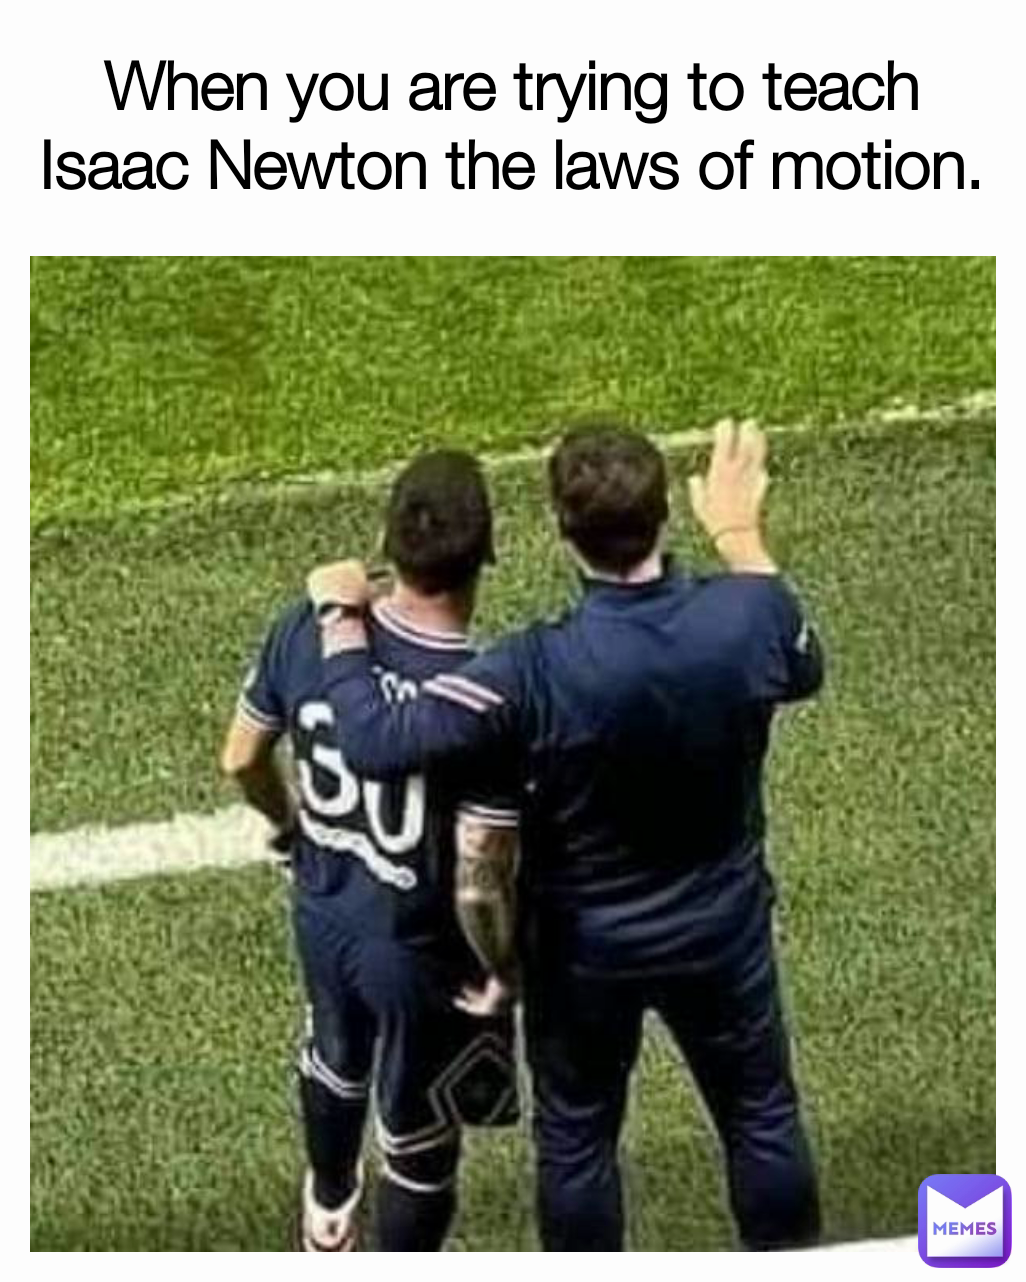 When you are trying to teach Isaac Newton the laws of motion.